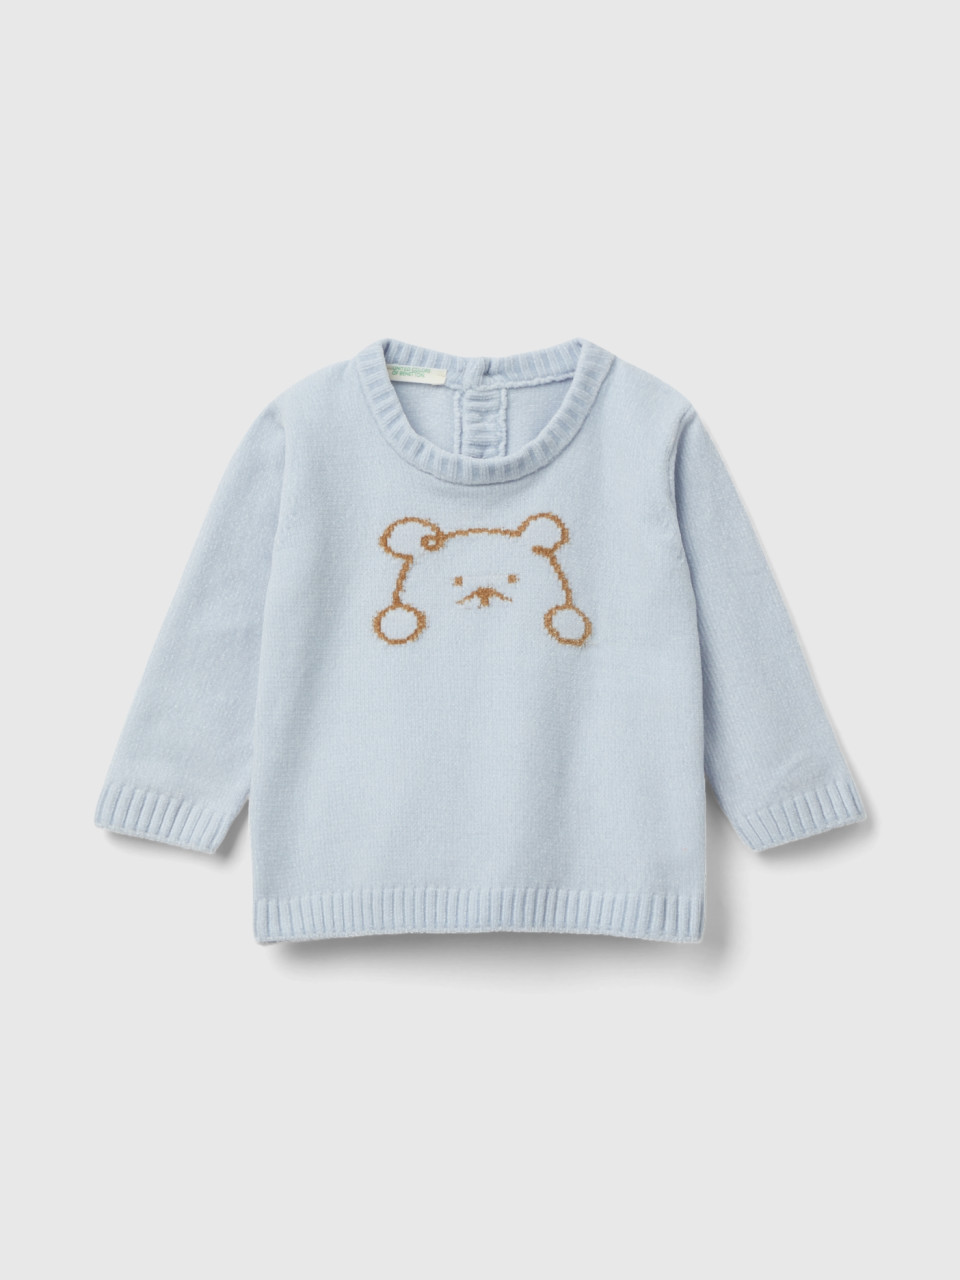 Benetton, Chenille Sweater With Inlay, Sky Blue, Kids